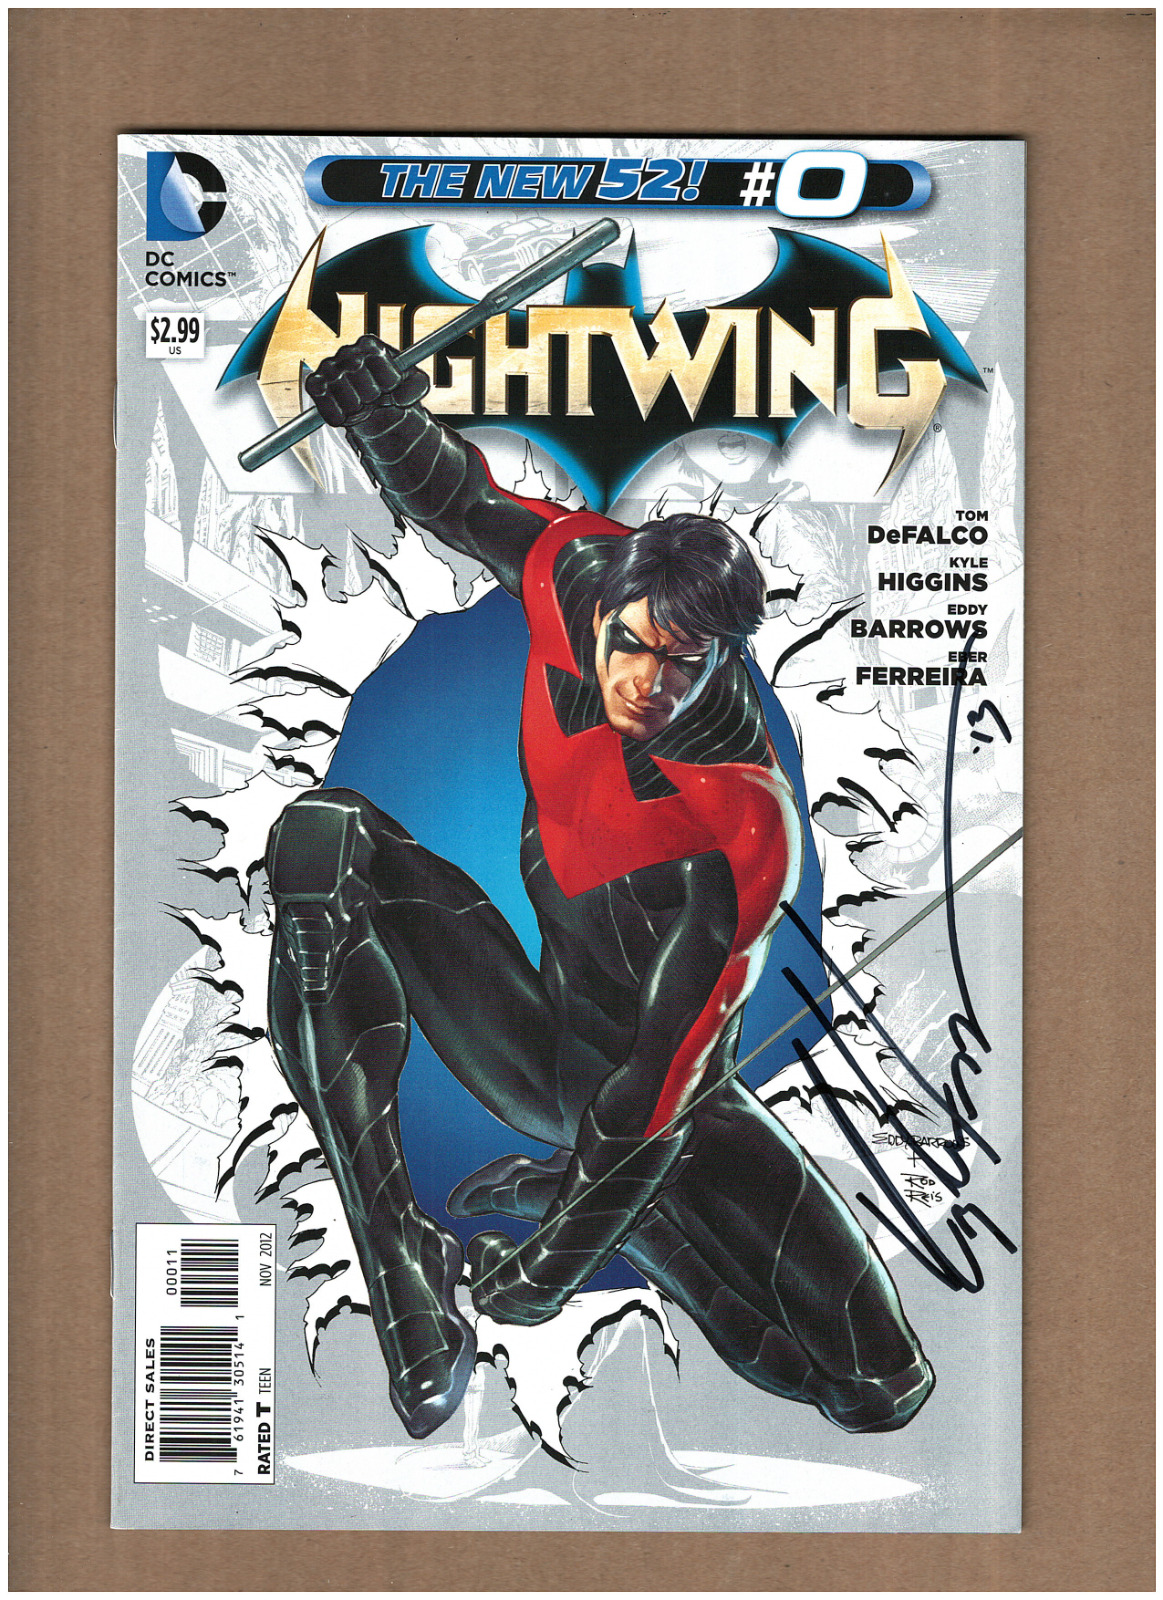 Nightwing #0 DC 2012 New 52 Signed by Kyle Higgins VF/NM 9.0